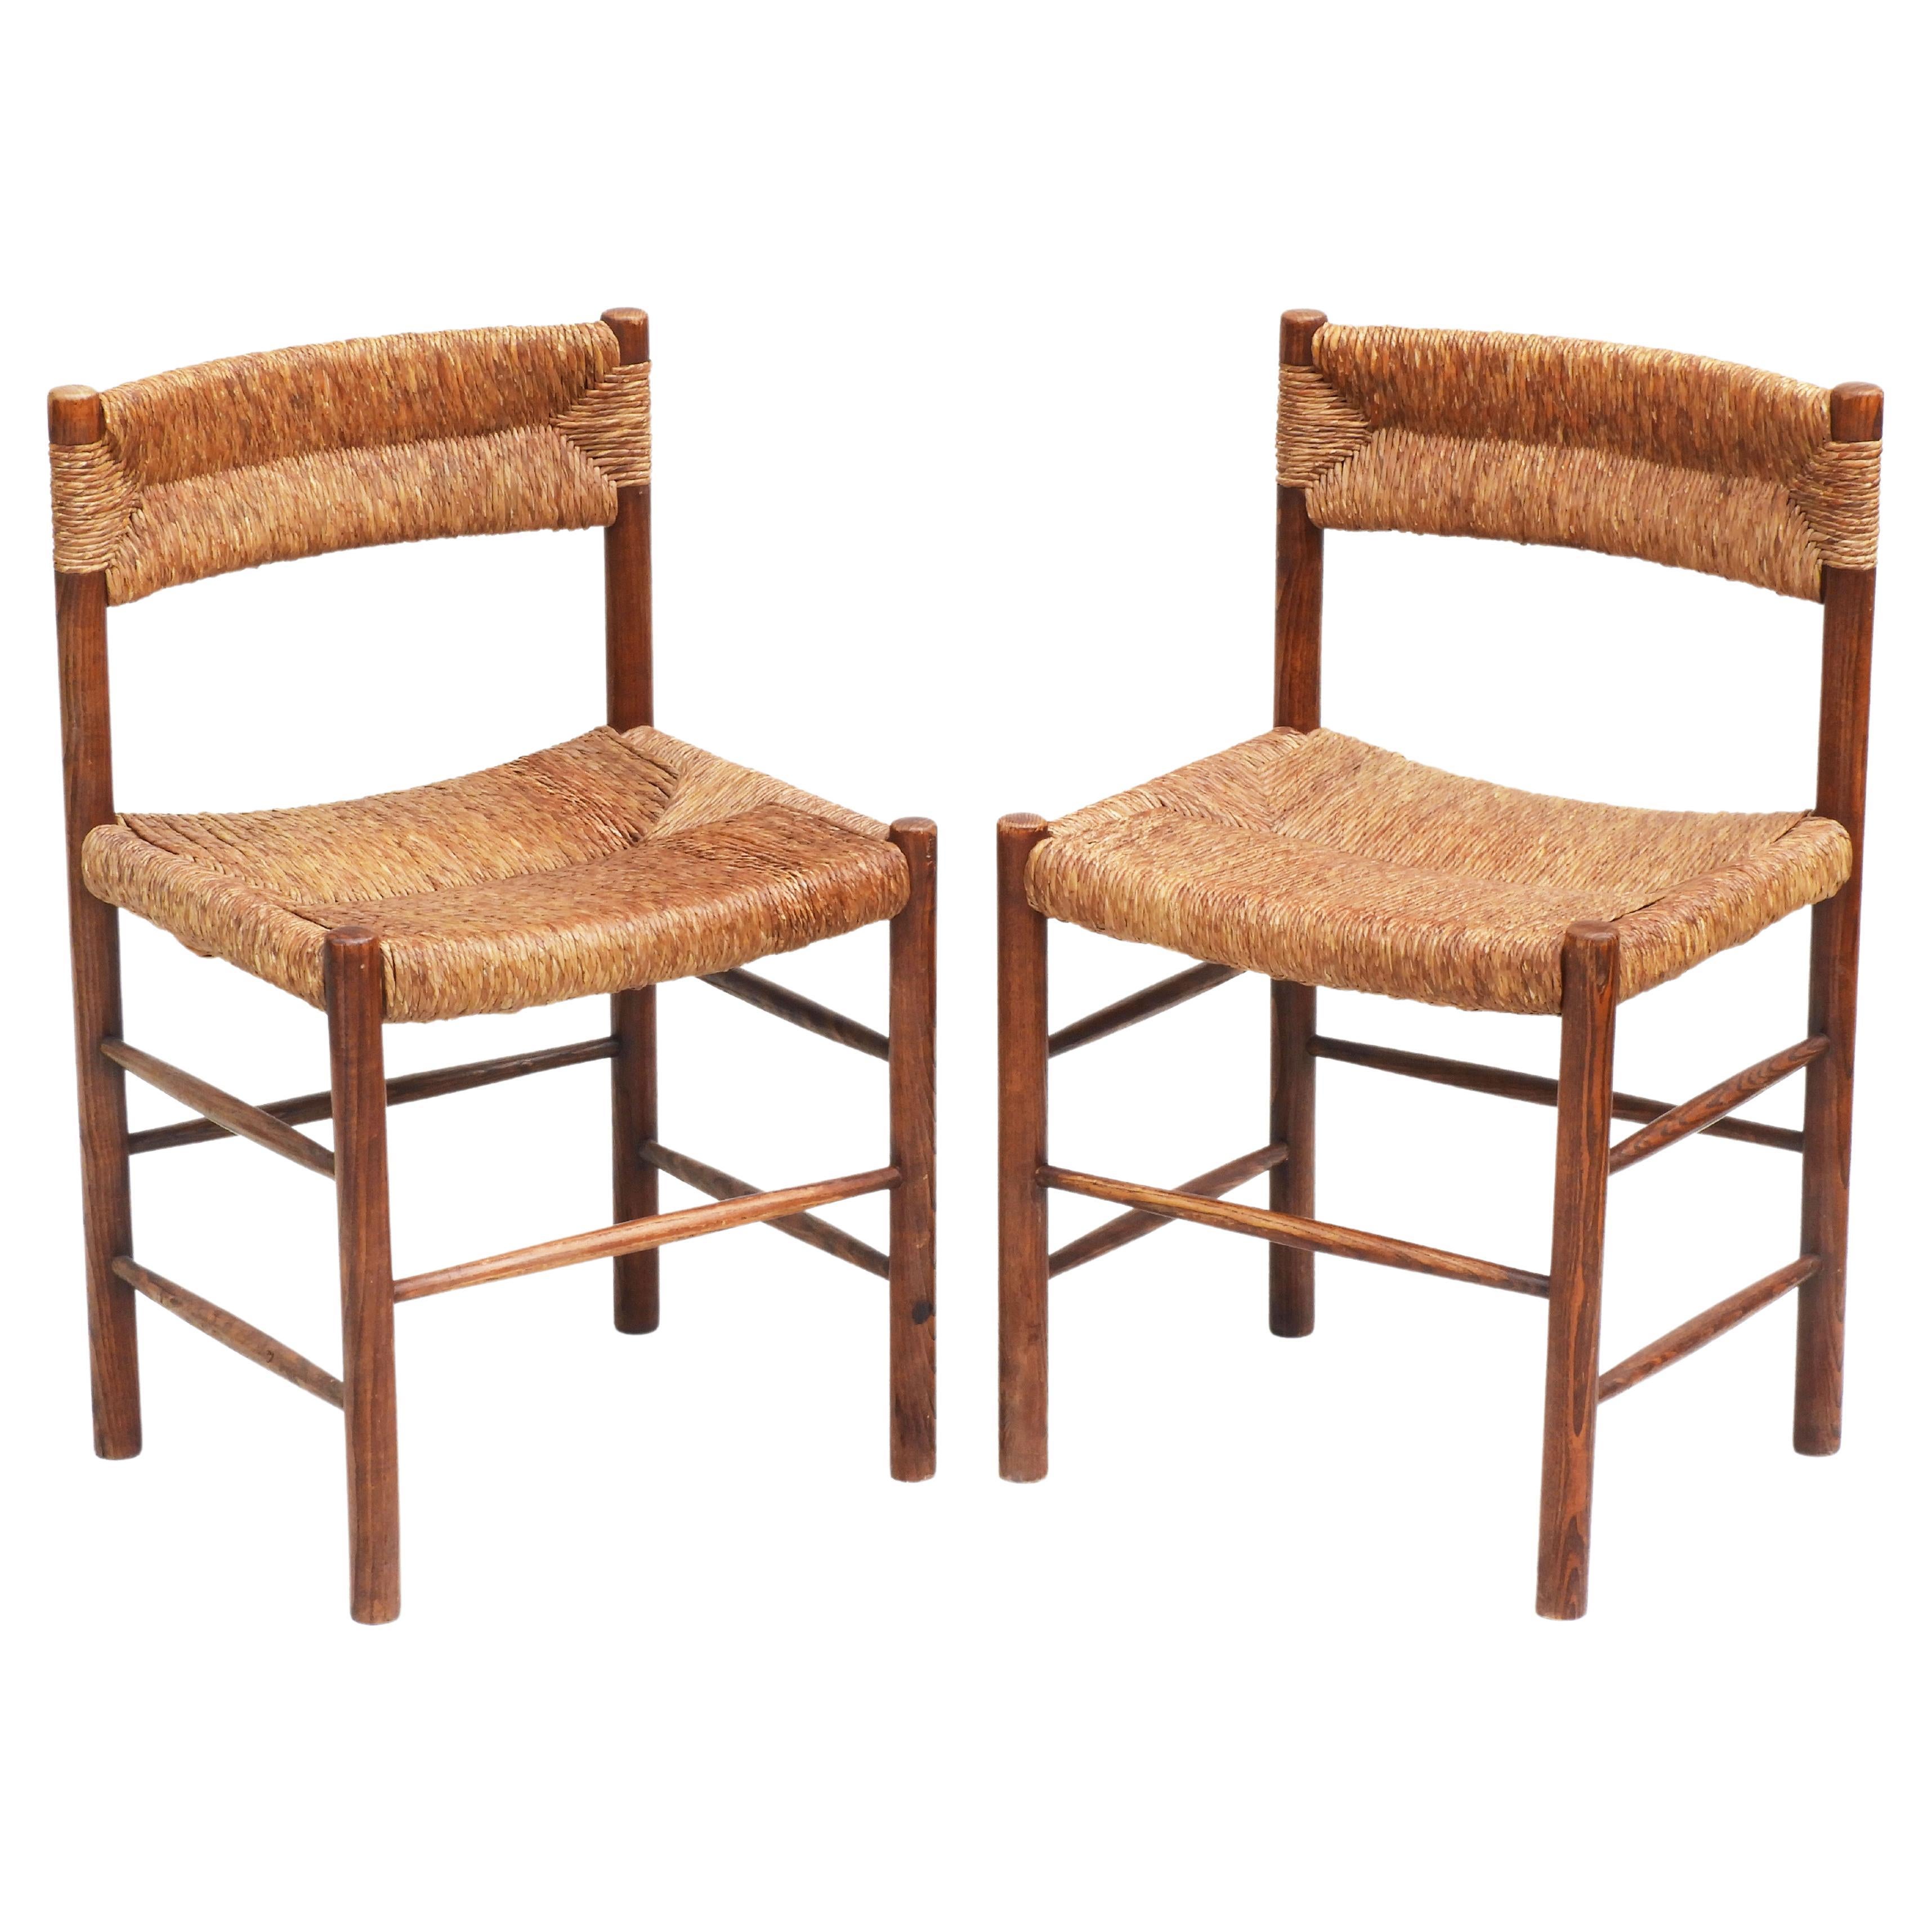 Pair of Dordogne Chairs by Charlotte Perriande for Robert Sentou France, 1960s